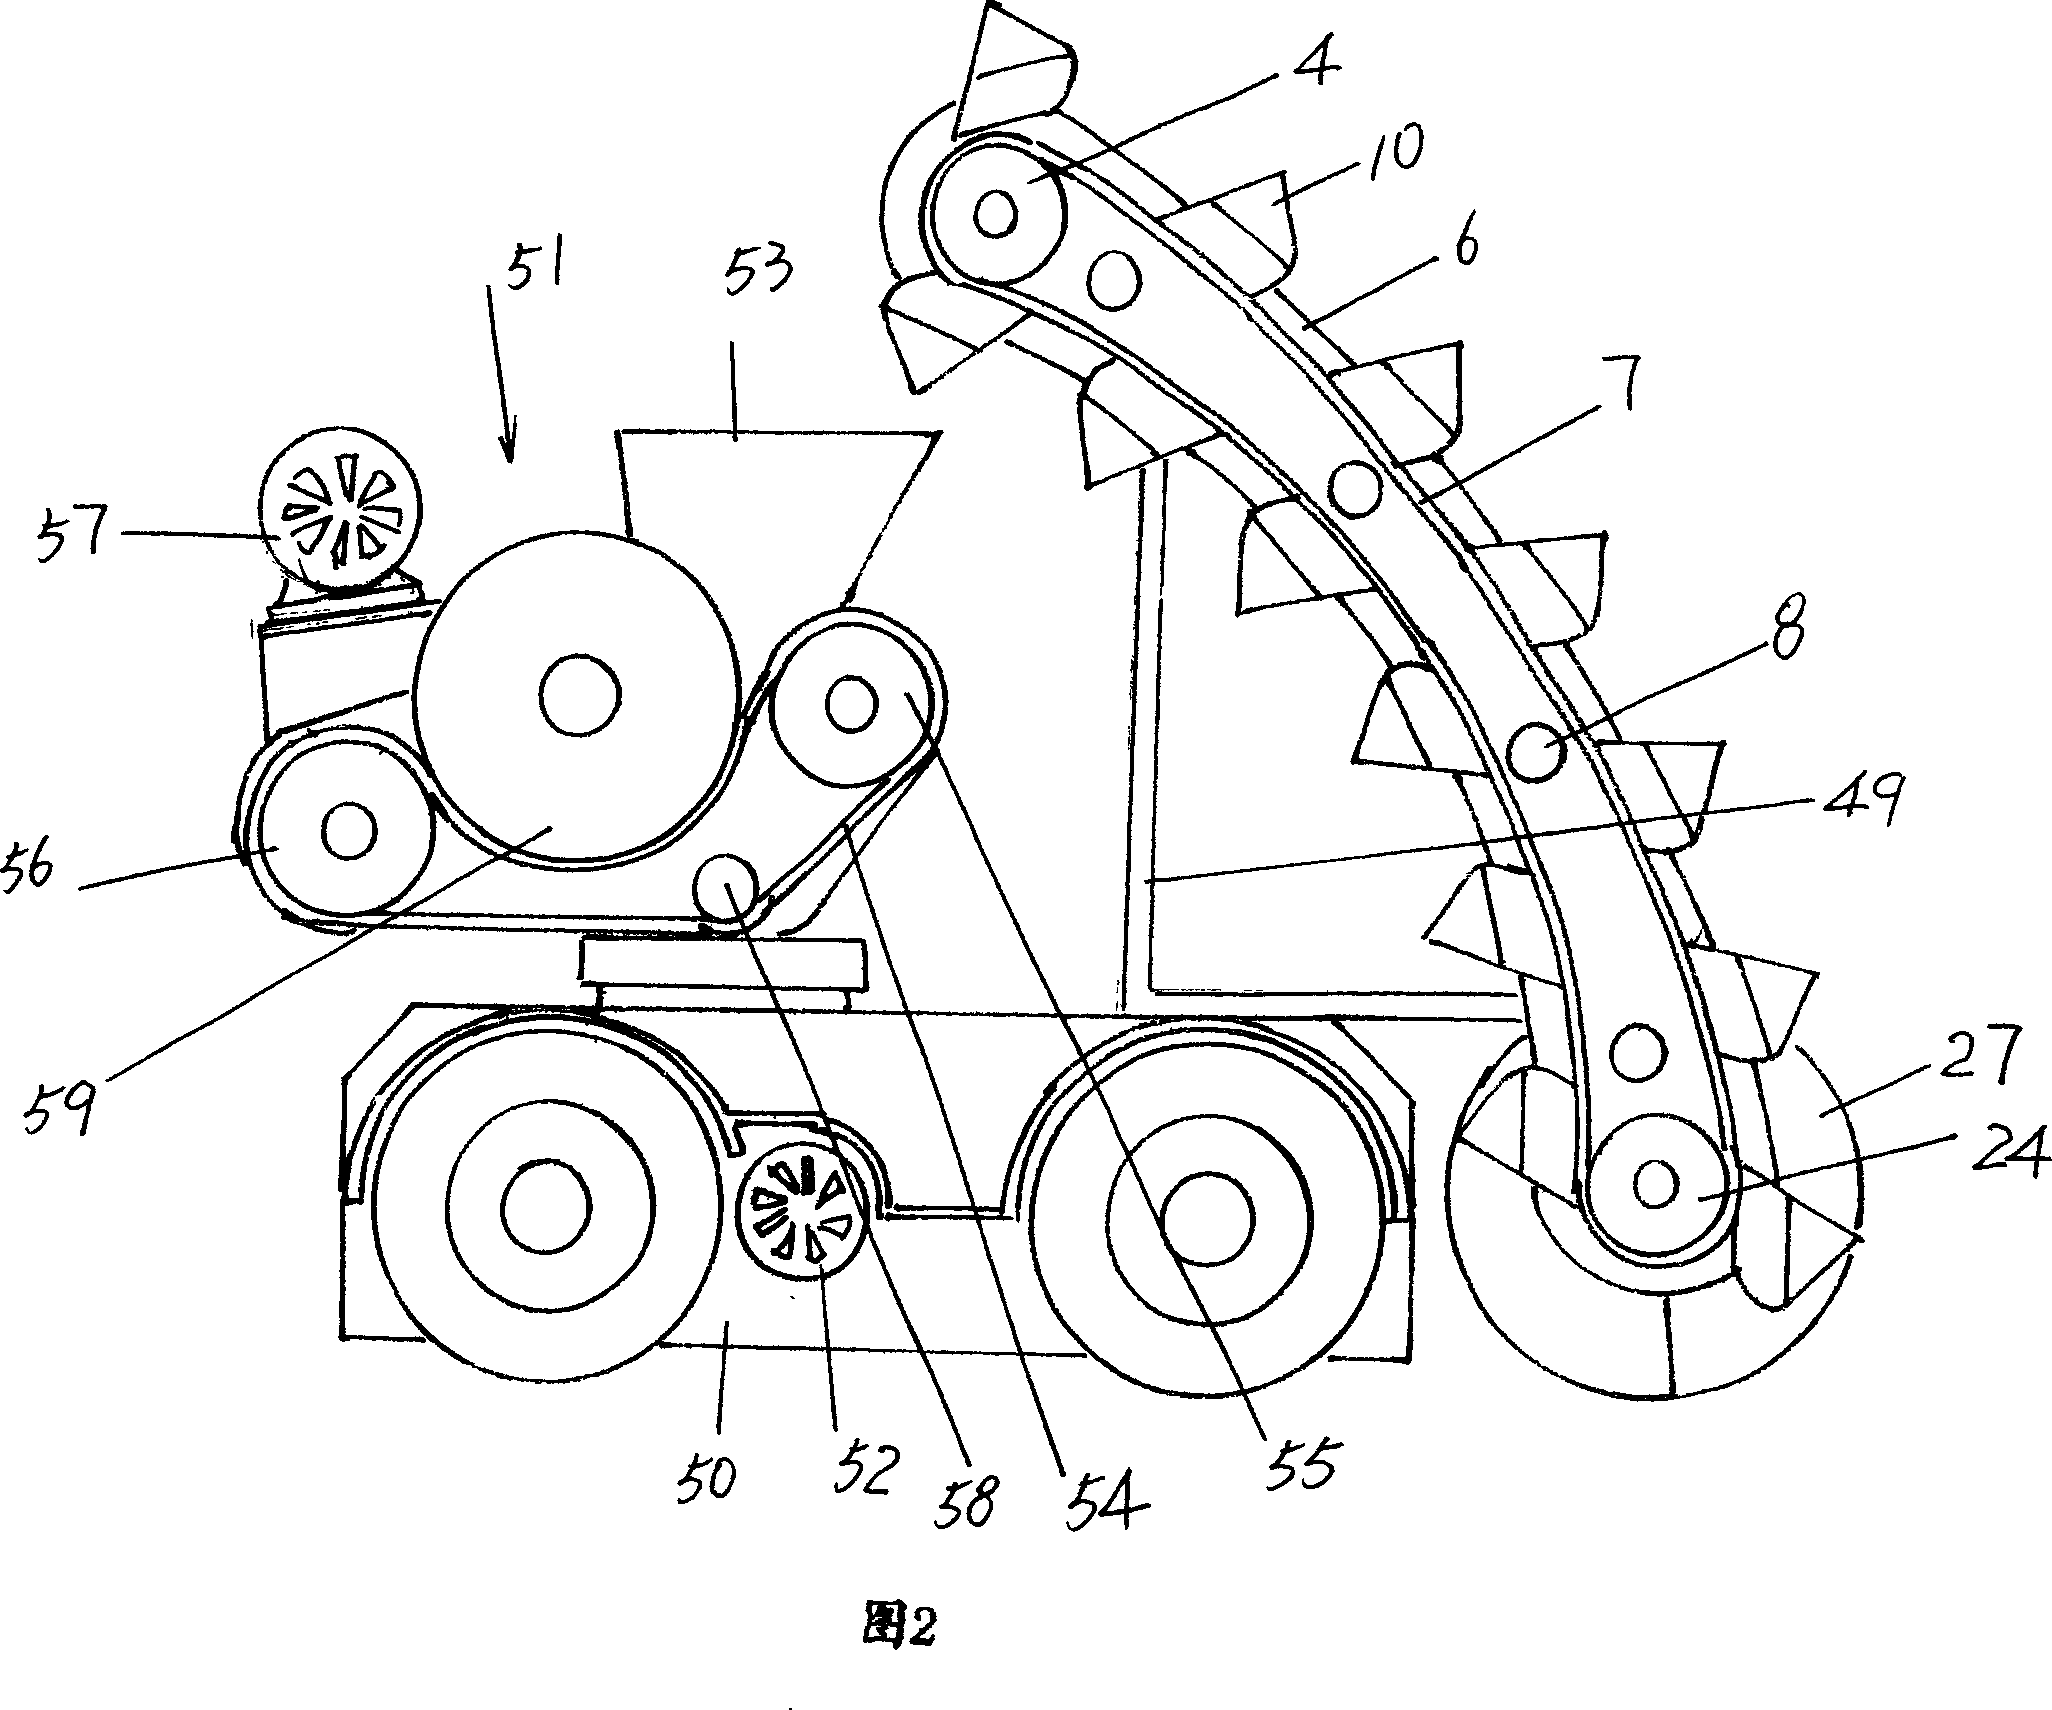 Material fetching mechanism for full-automatic cabin cleaning vehicle